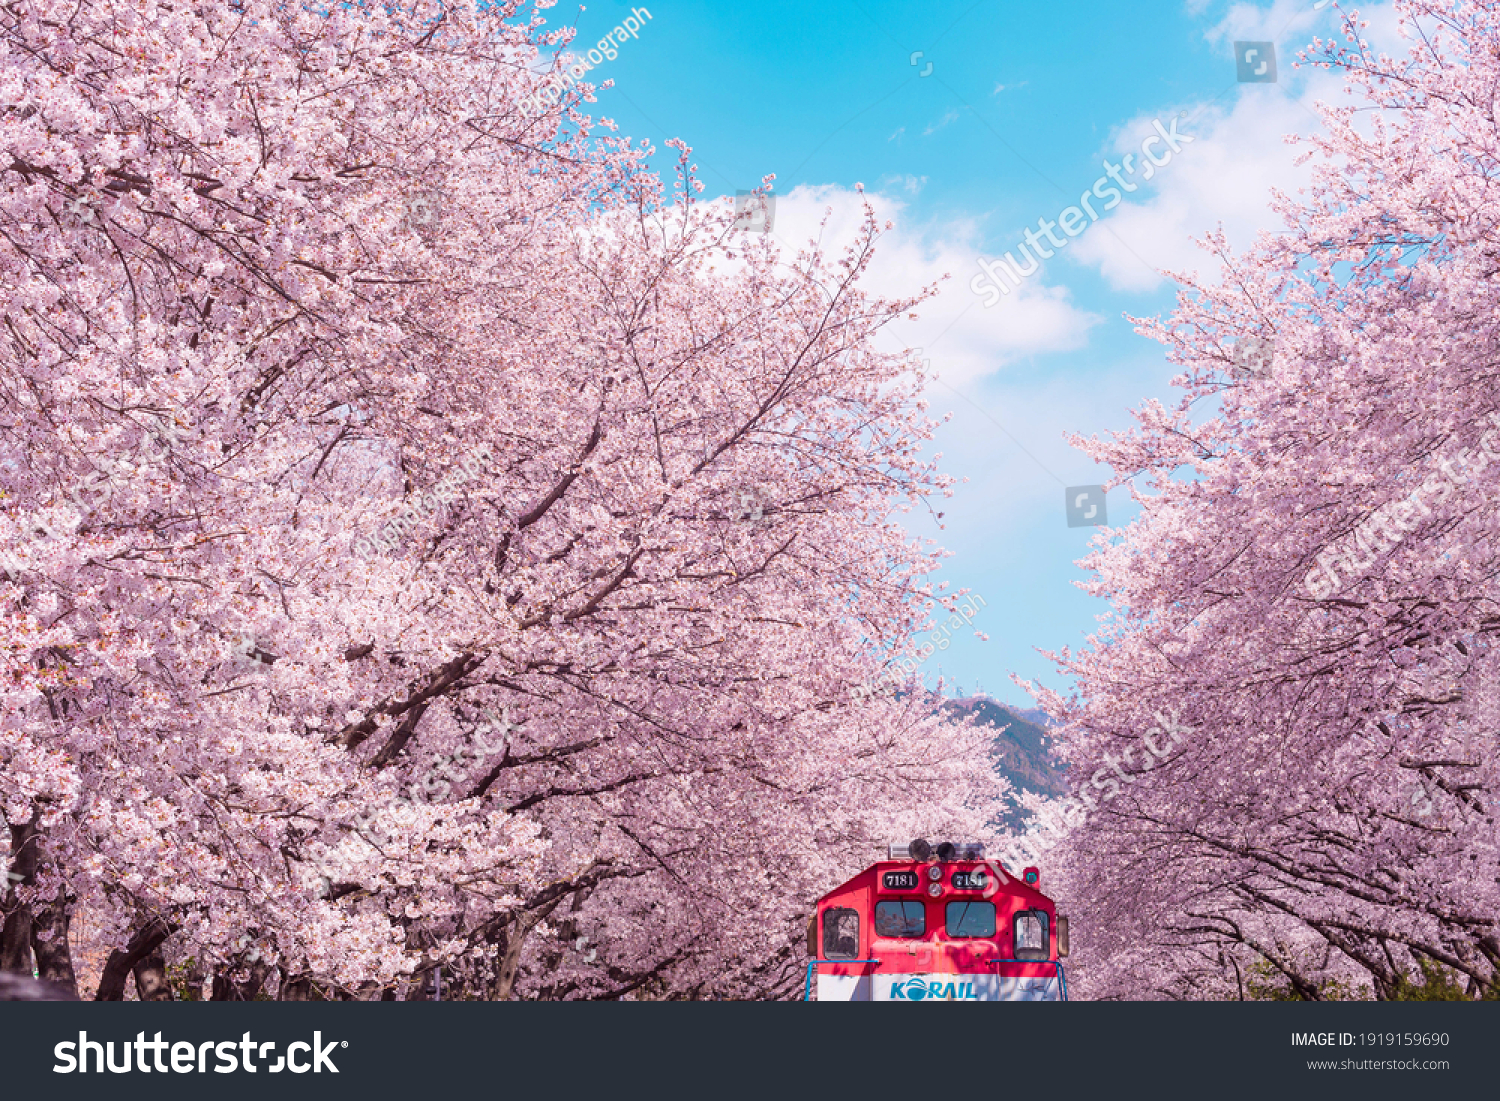 Cherry blossom with train in spring in Korea is the popular cherry blossom viewing spot, jinhae South Korea. #1919159690